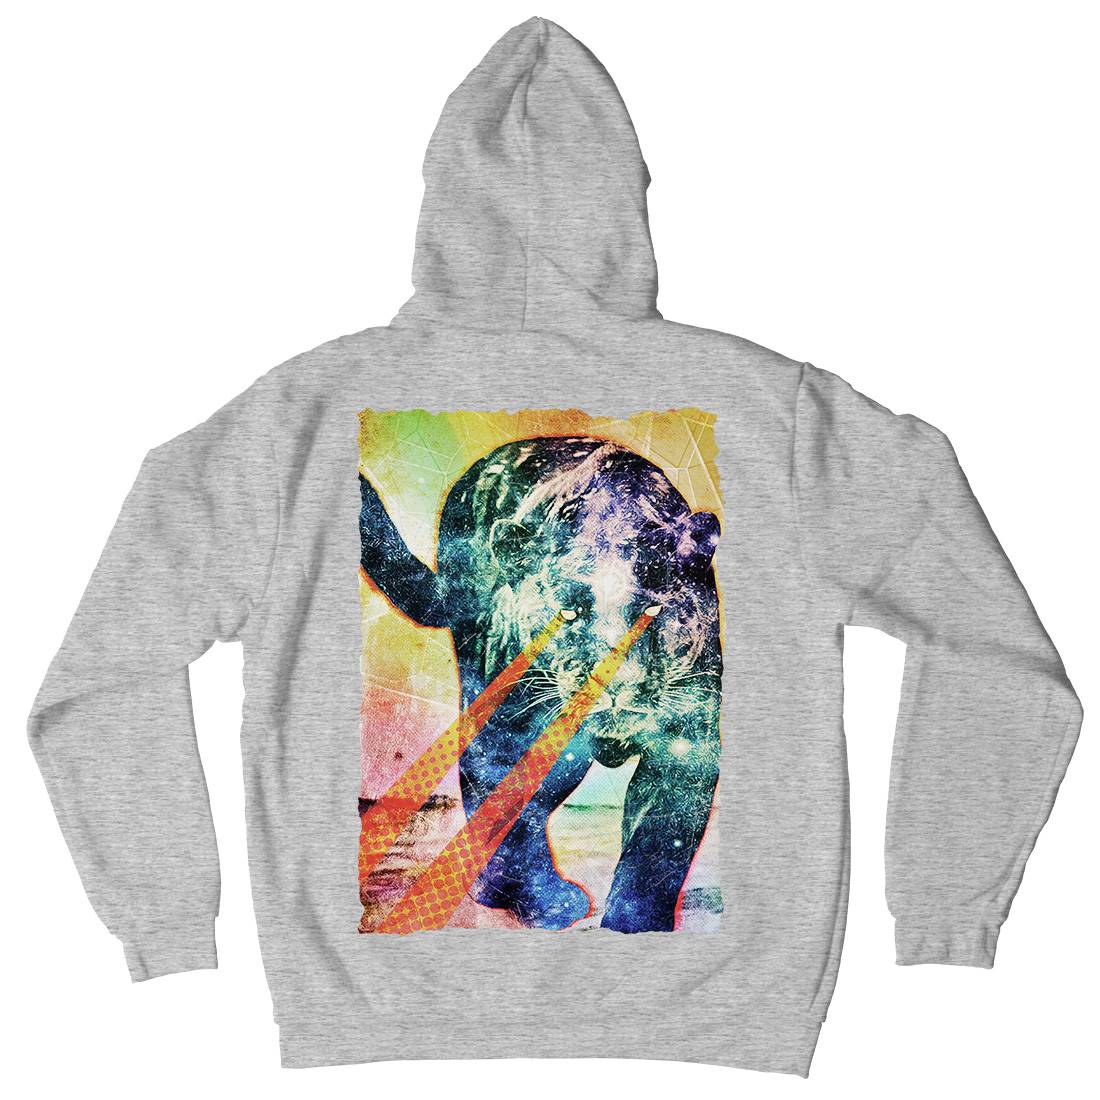 Psycat Tiger Mens Hoodie With Pocket Space A896